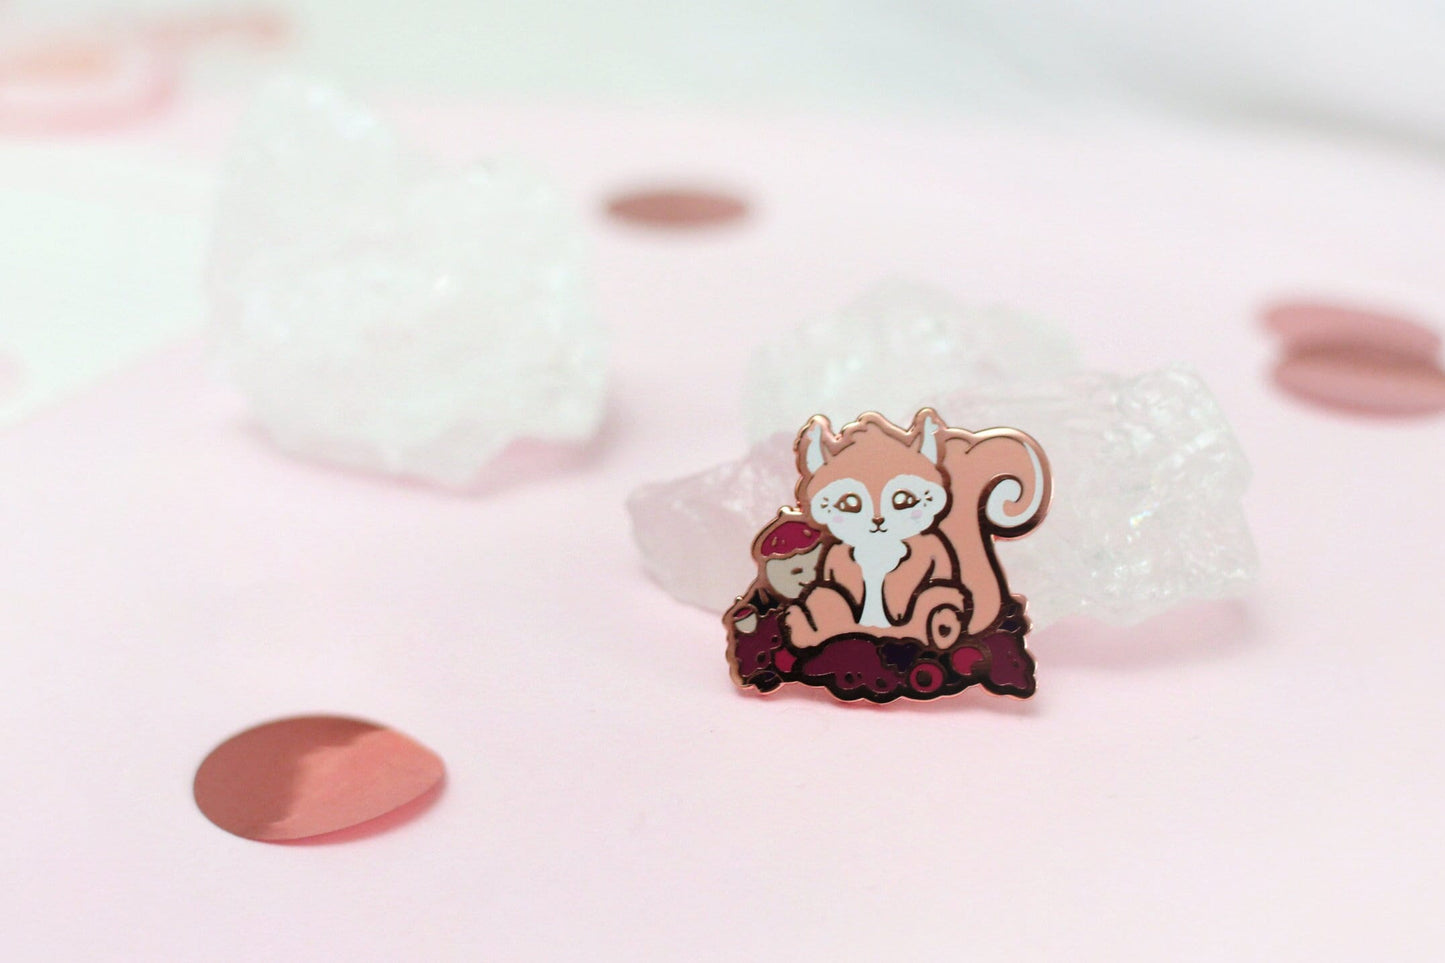 Cute Squirrel Pin | Rosegold Hard Enamel Pin | Autumn Vibes | Kawaii Aesthetic Birthday Gift for Her | Christmas Present for Him | Miamouz